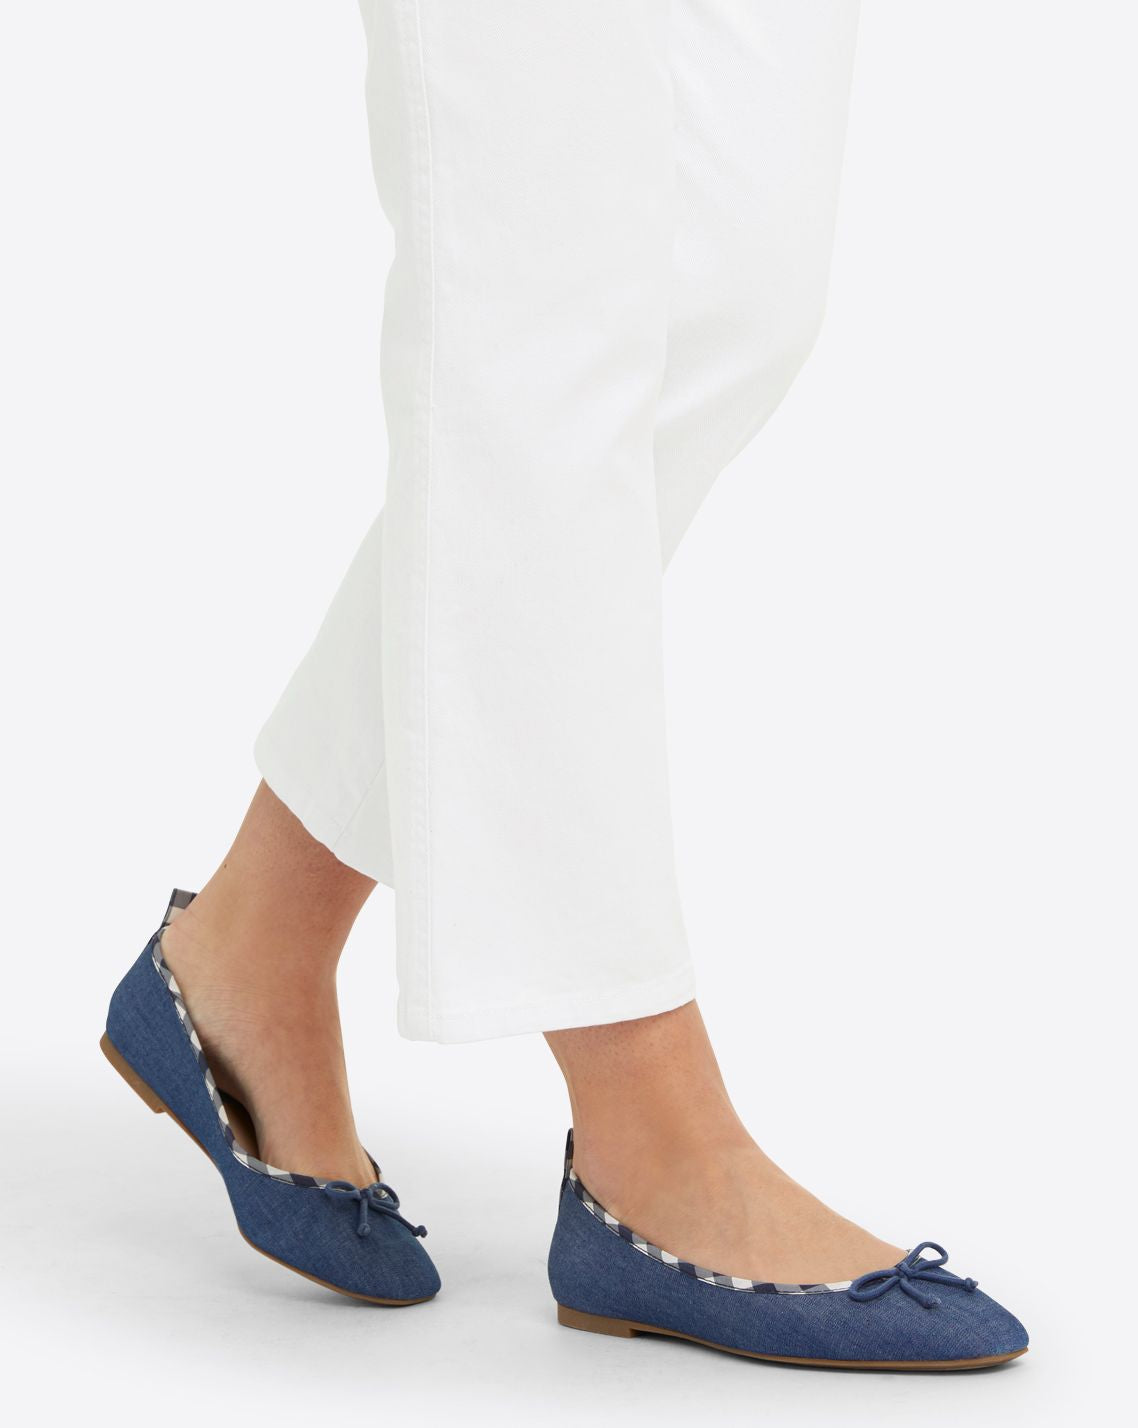 Taylor Ballet Flats in Chambray